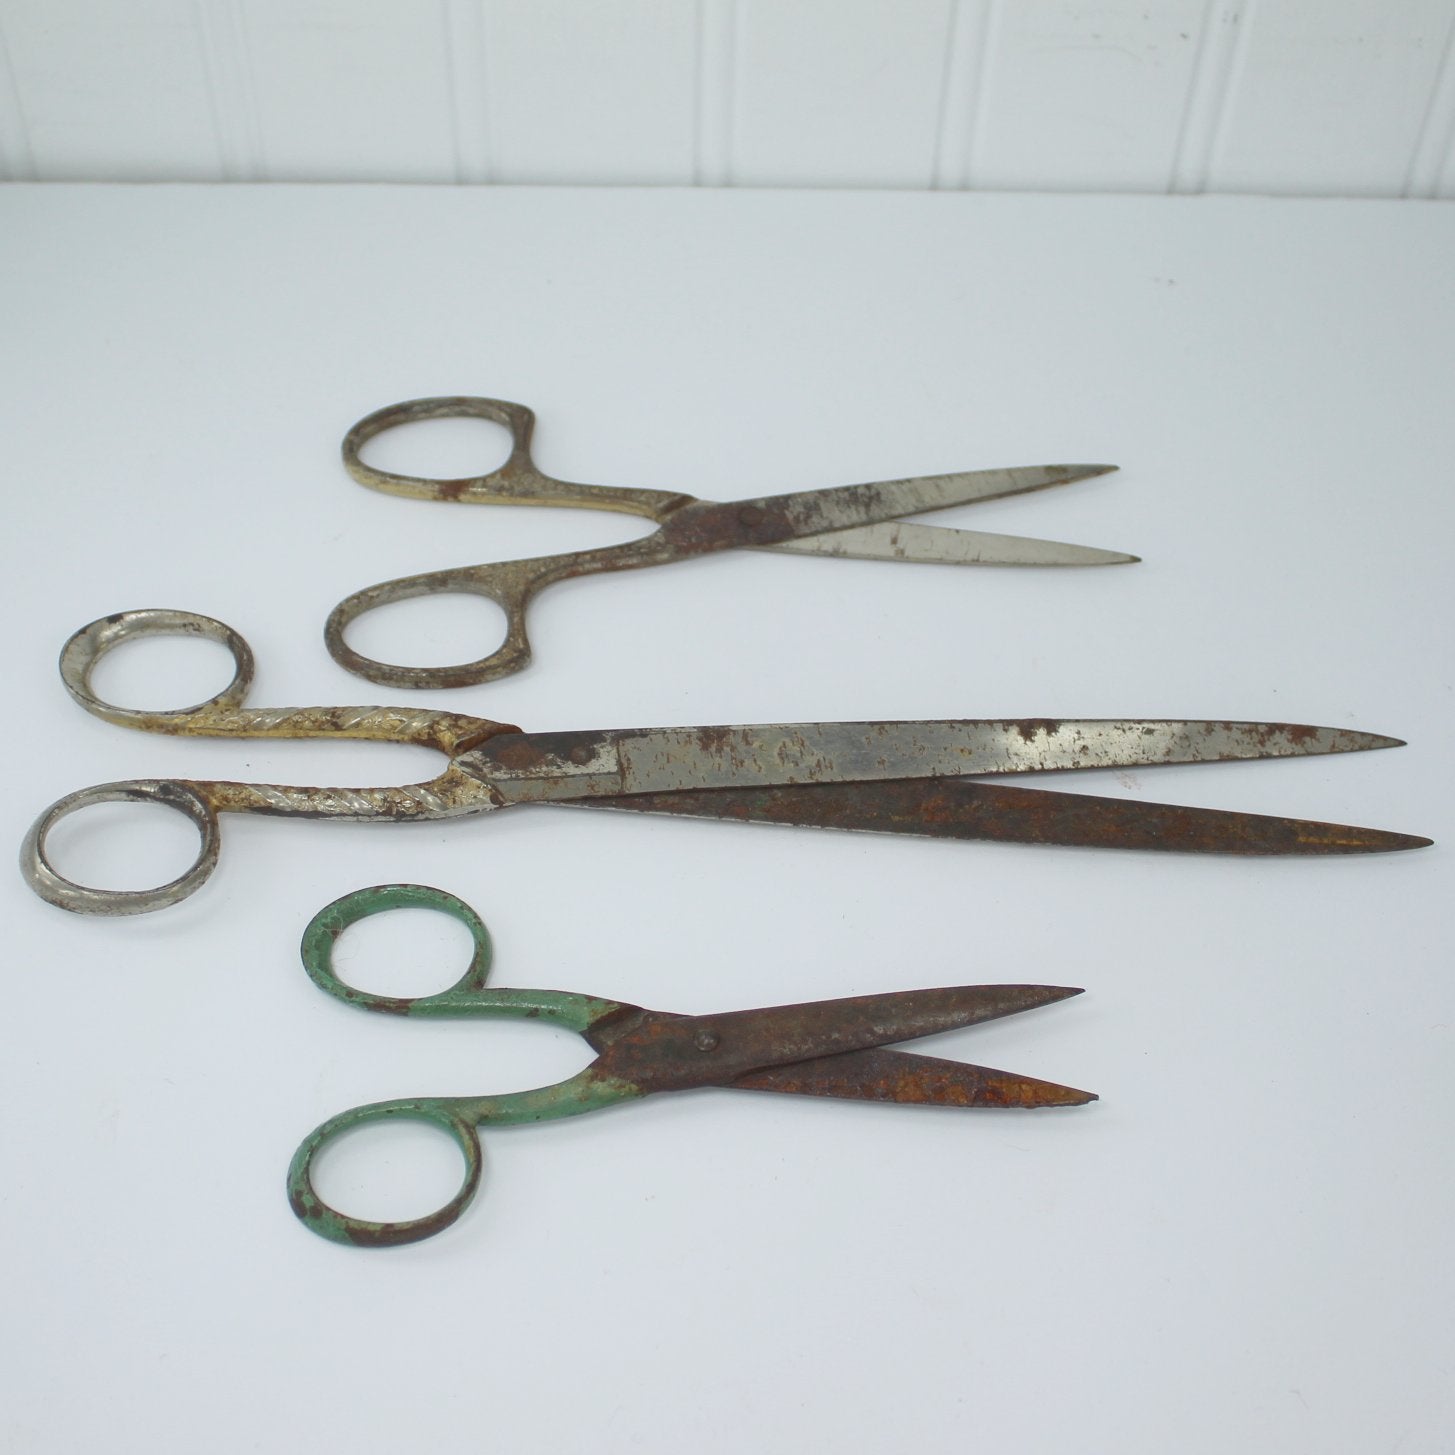 Collection Lot 25 Pairs Scissors Pinking Shears Buttonhole Scissors Embroidery Dressmaker Wiss Griffon Garland Clauss Erie Cut check for vintage condition with closeups